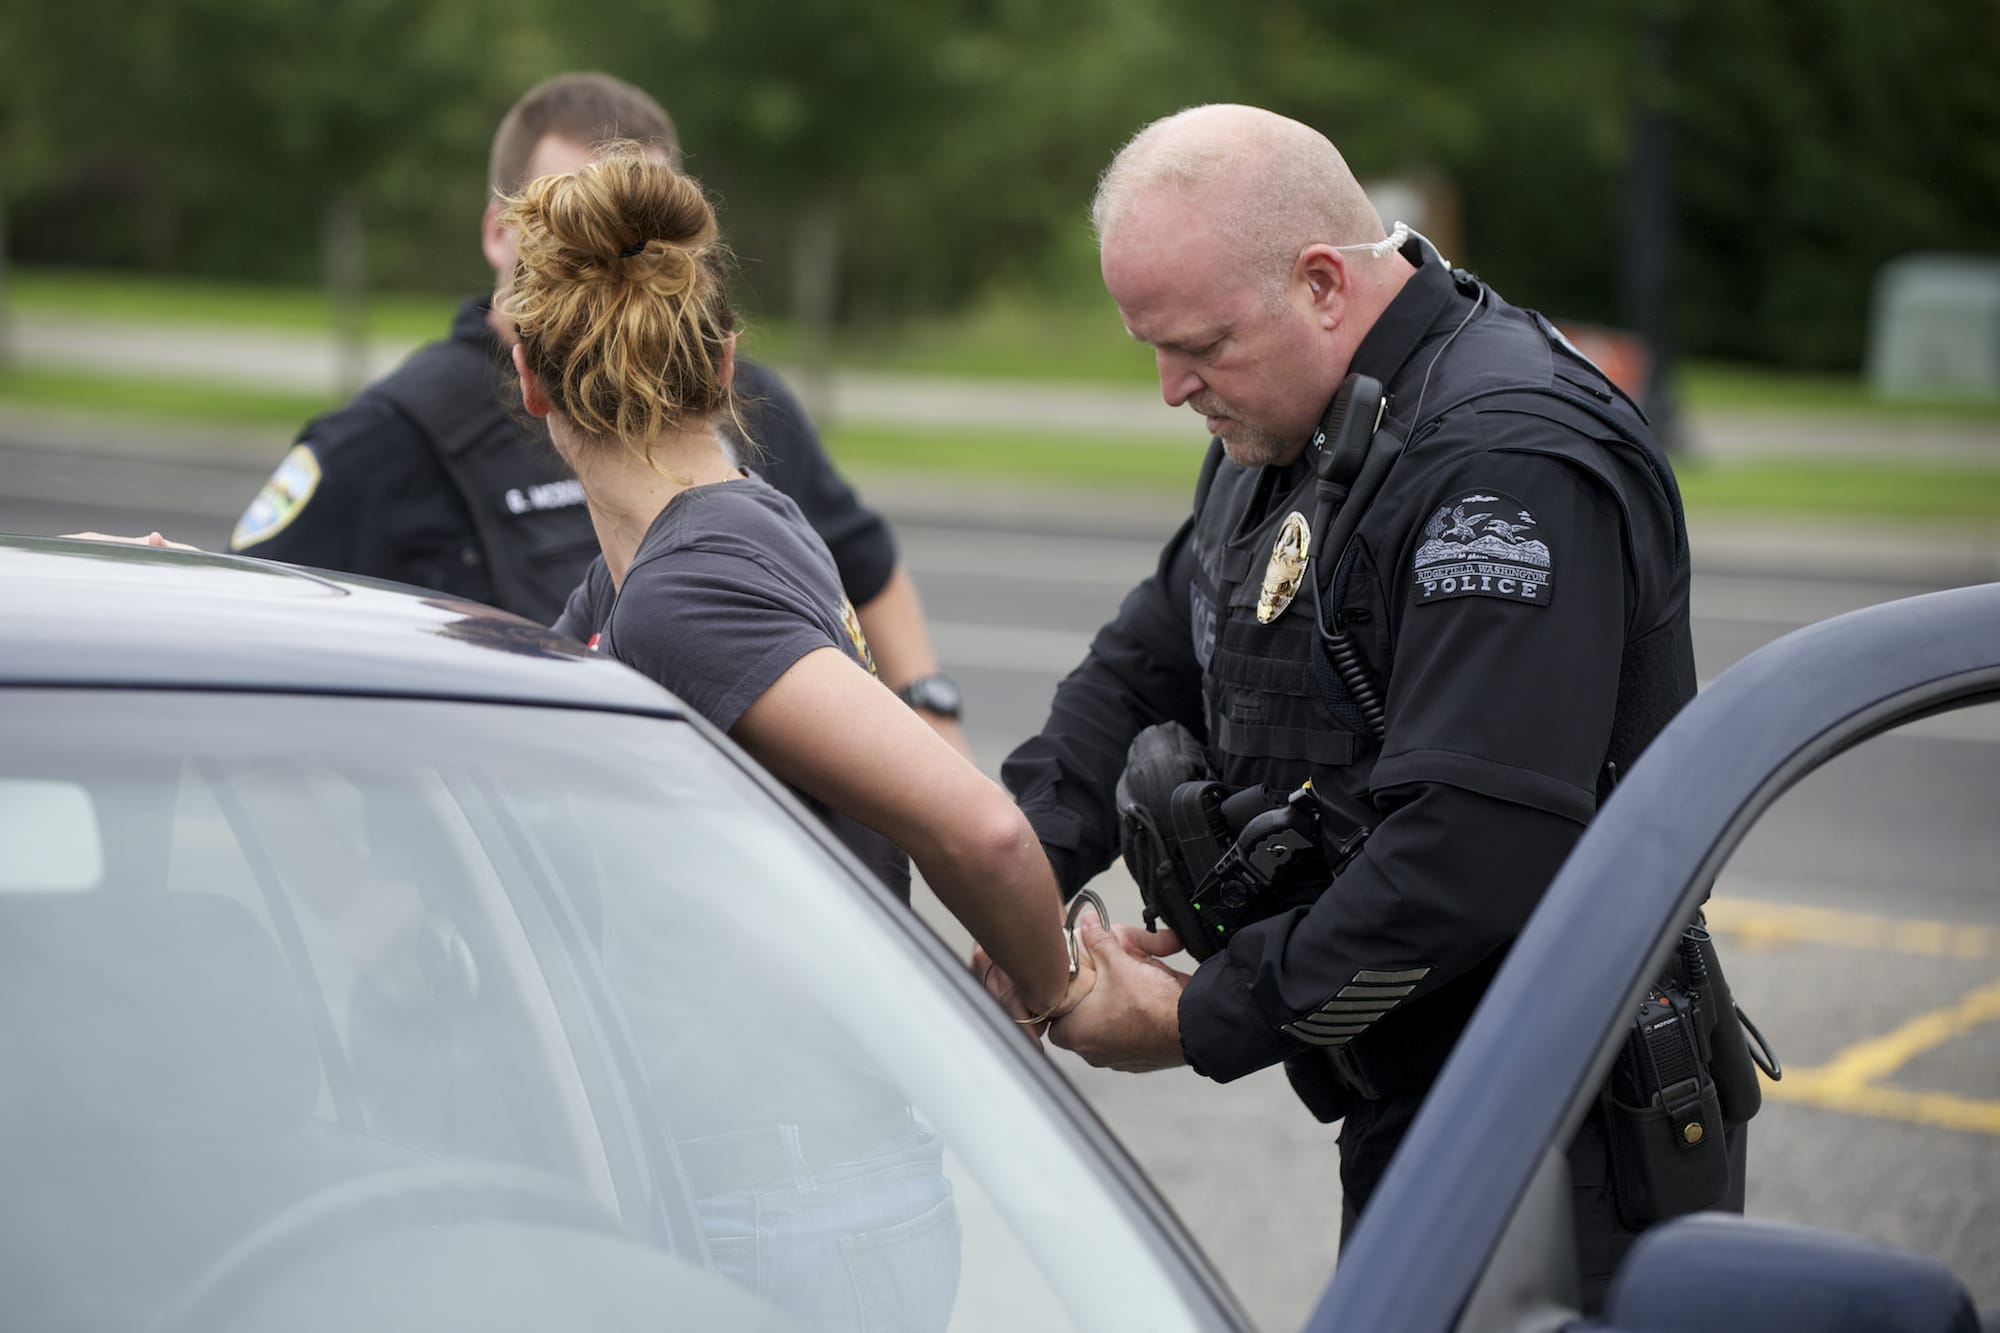 Ridgefield police Officer Jason Ferriss detains a woman after a traffic stop earlier this month on Pioneer Street, east of downtown.